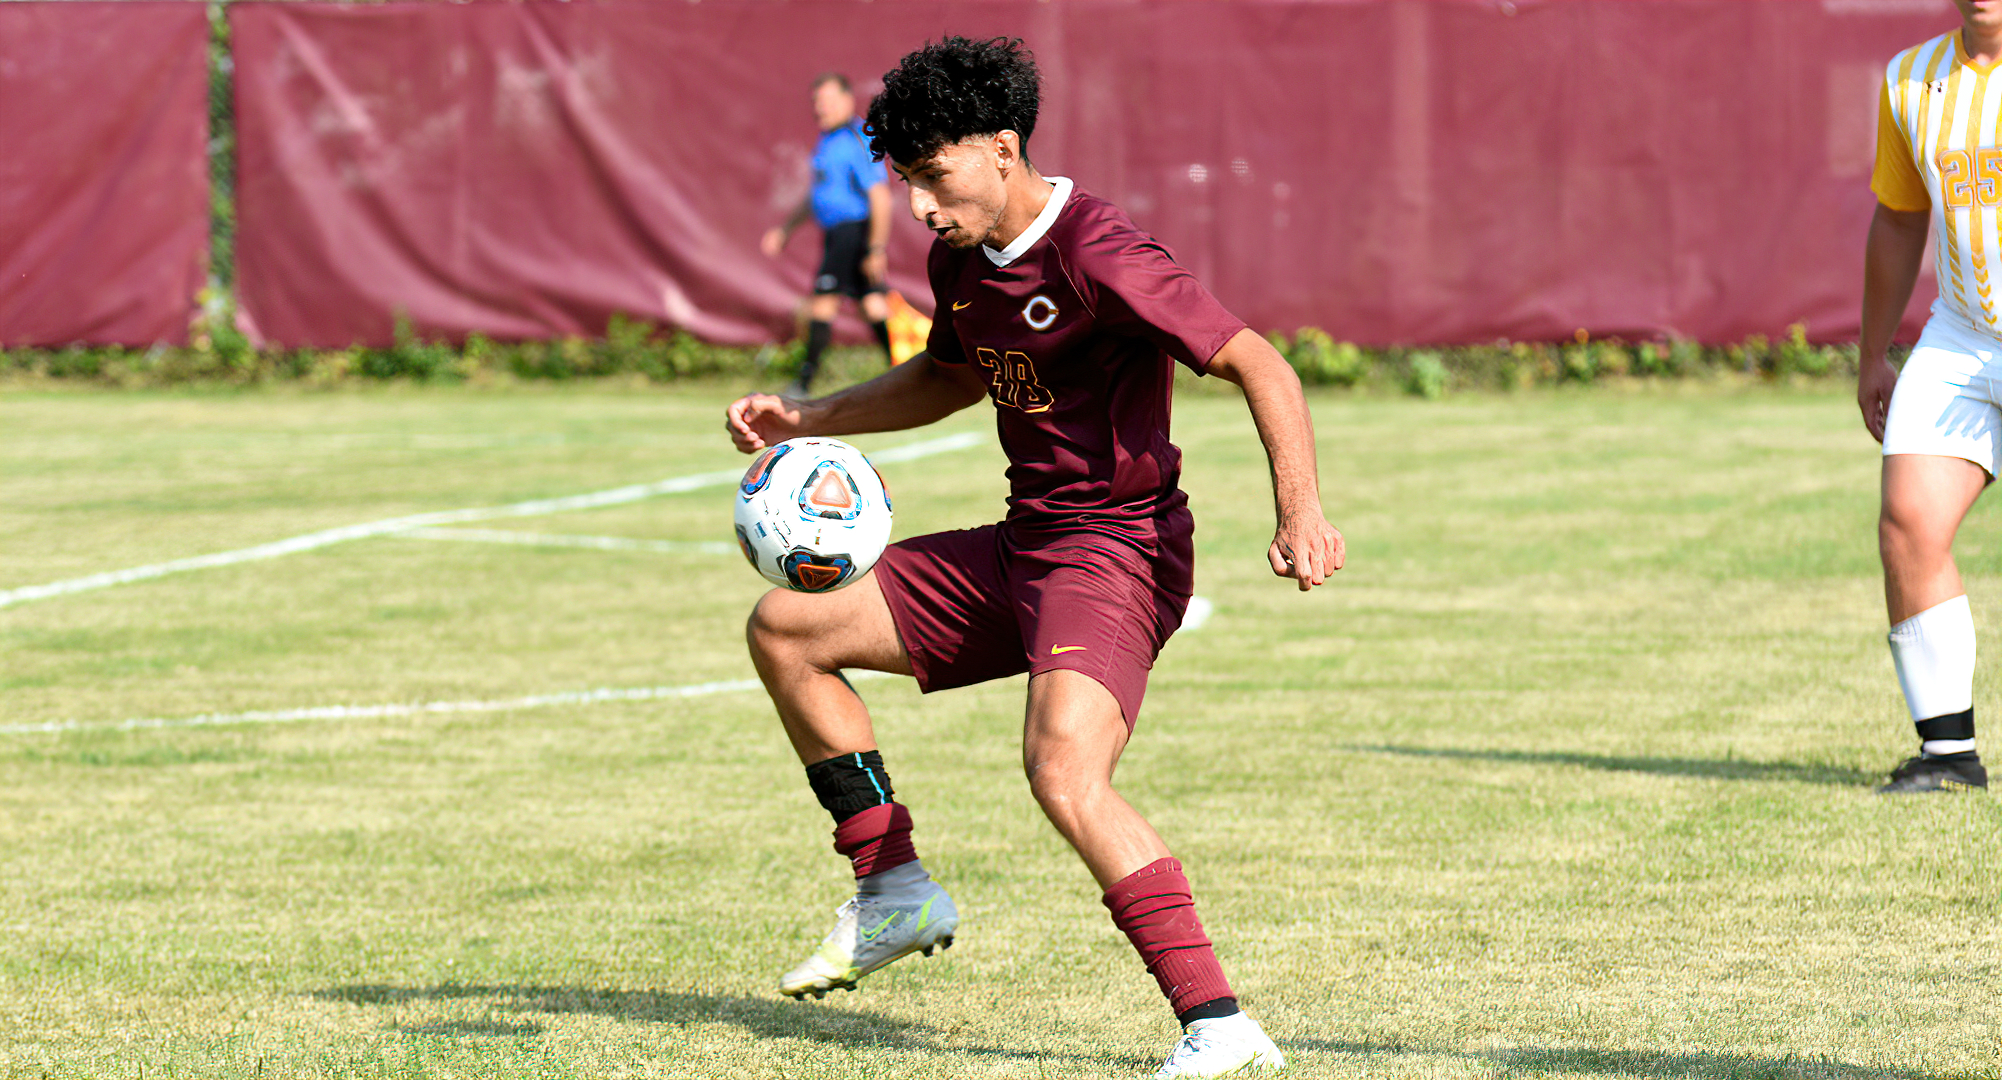 Freshman Yousif Alshihmani scored his first collegiate goal in the Cobbers' game at St. John's.